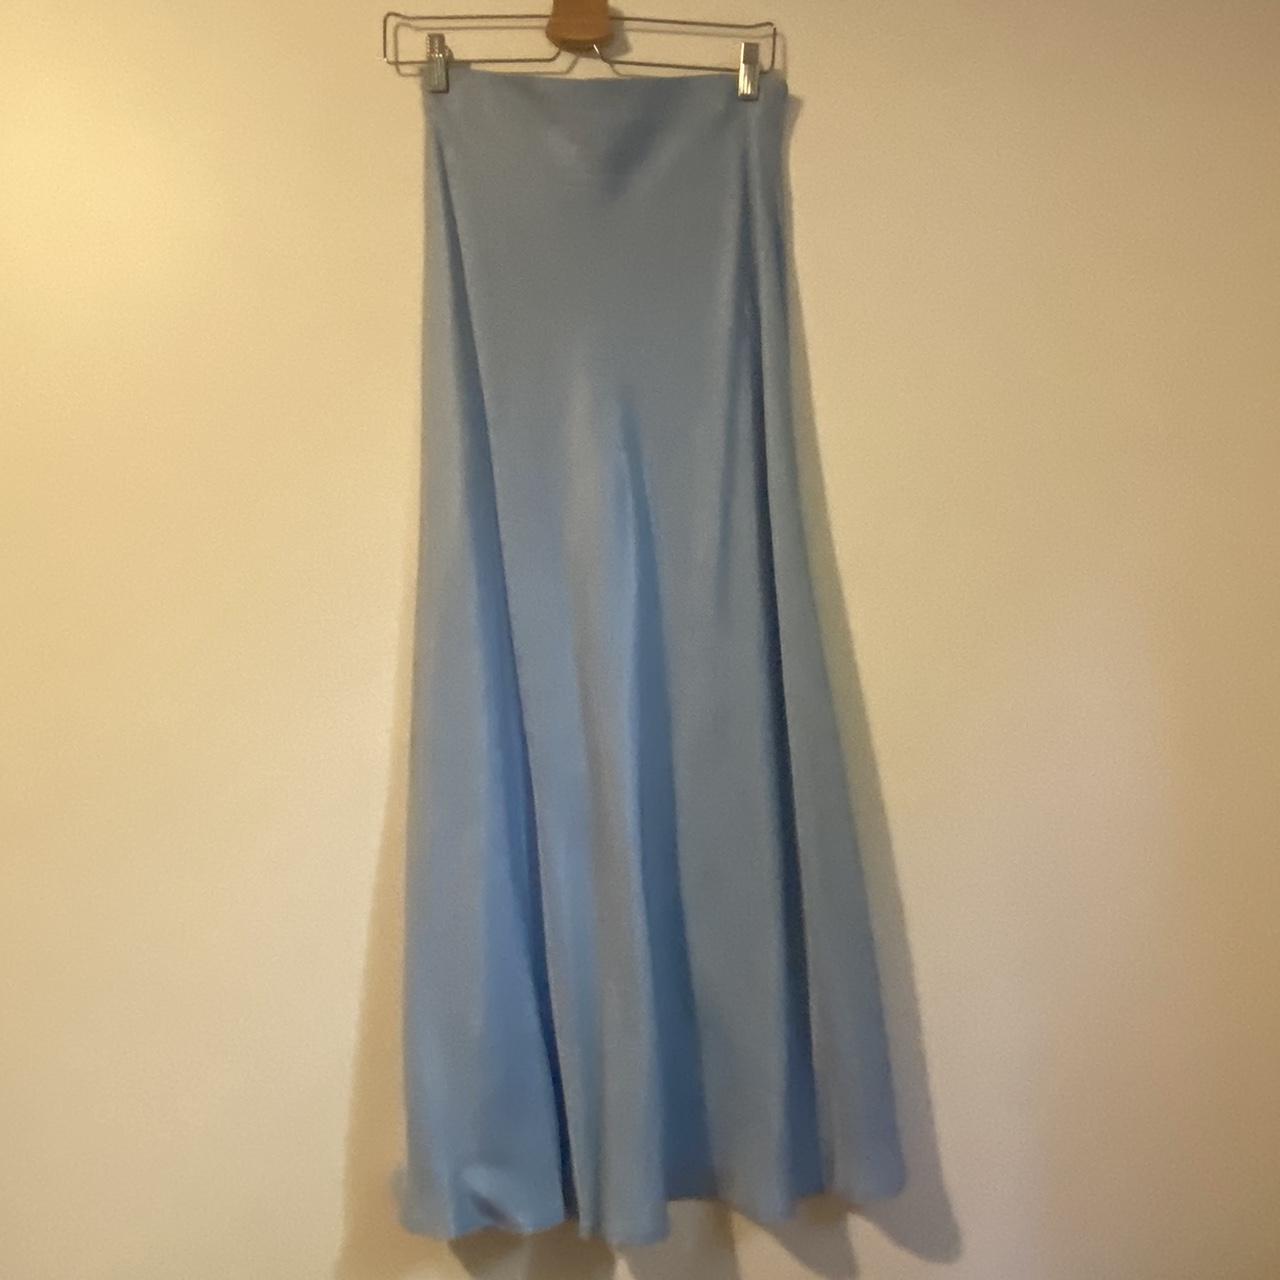 Seed satin slip skirt, size 8 Small tear, fraying at... - Depop